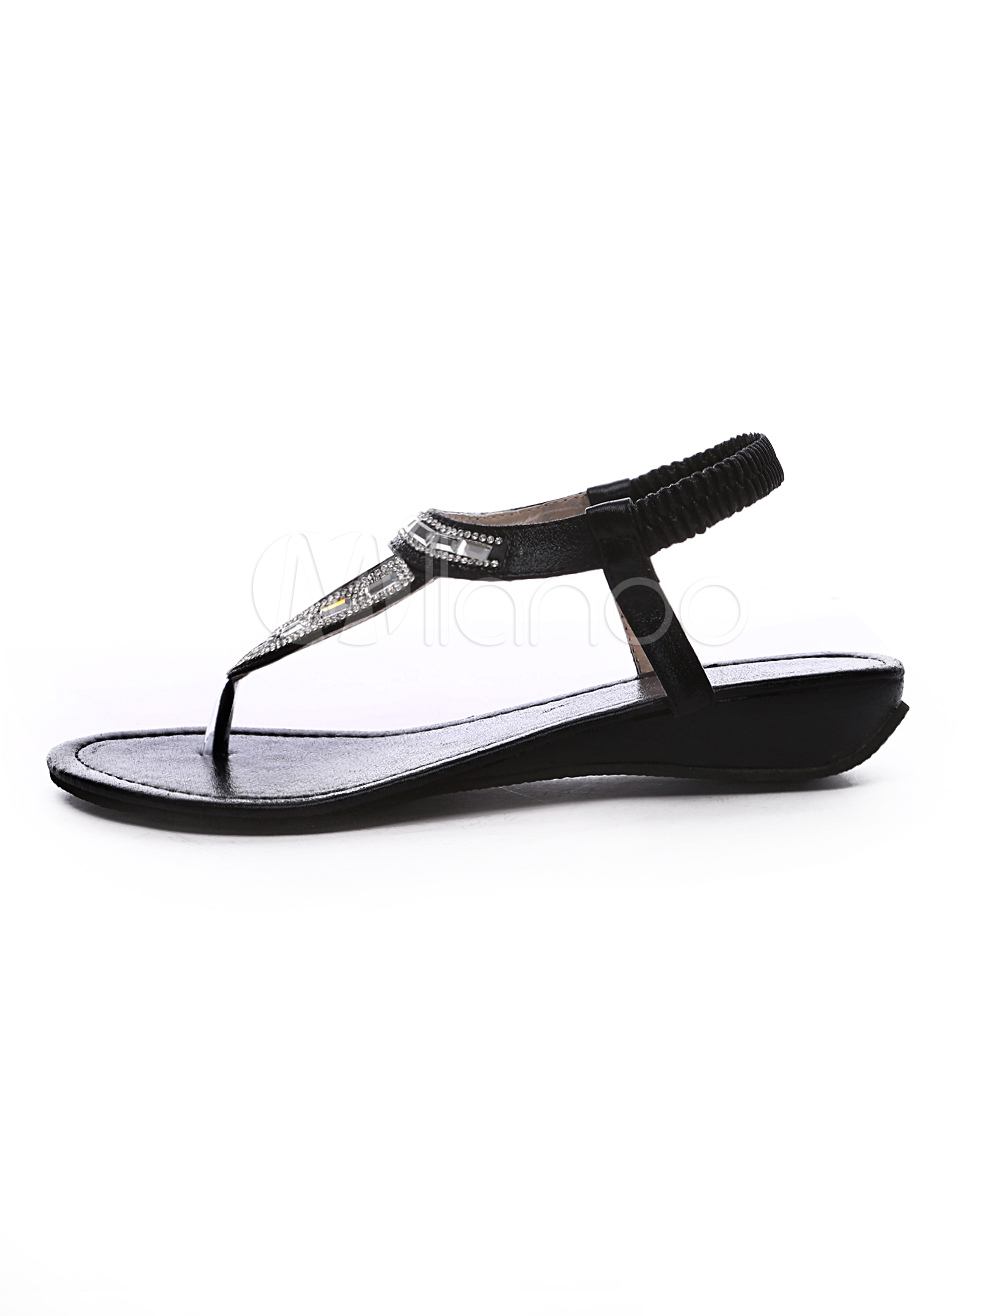 Chic Crystal PU Leather Flat Sandals for Women - Milanoo.com